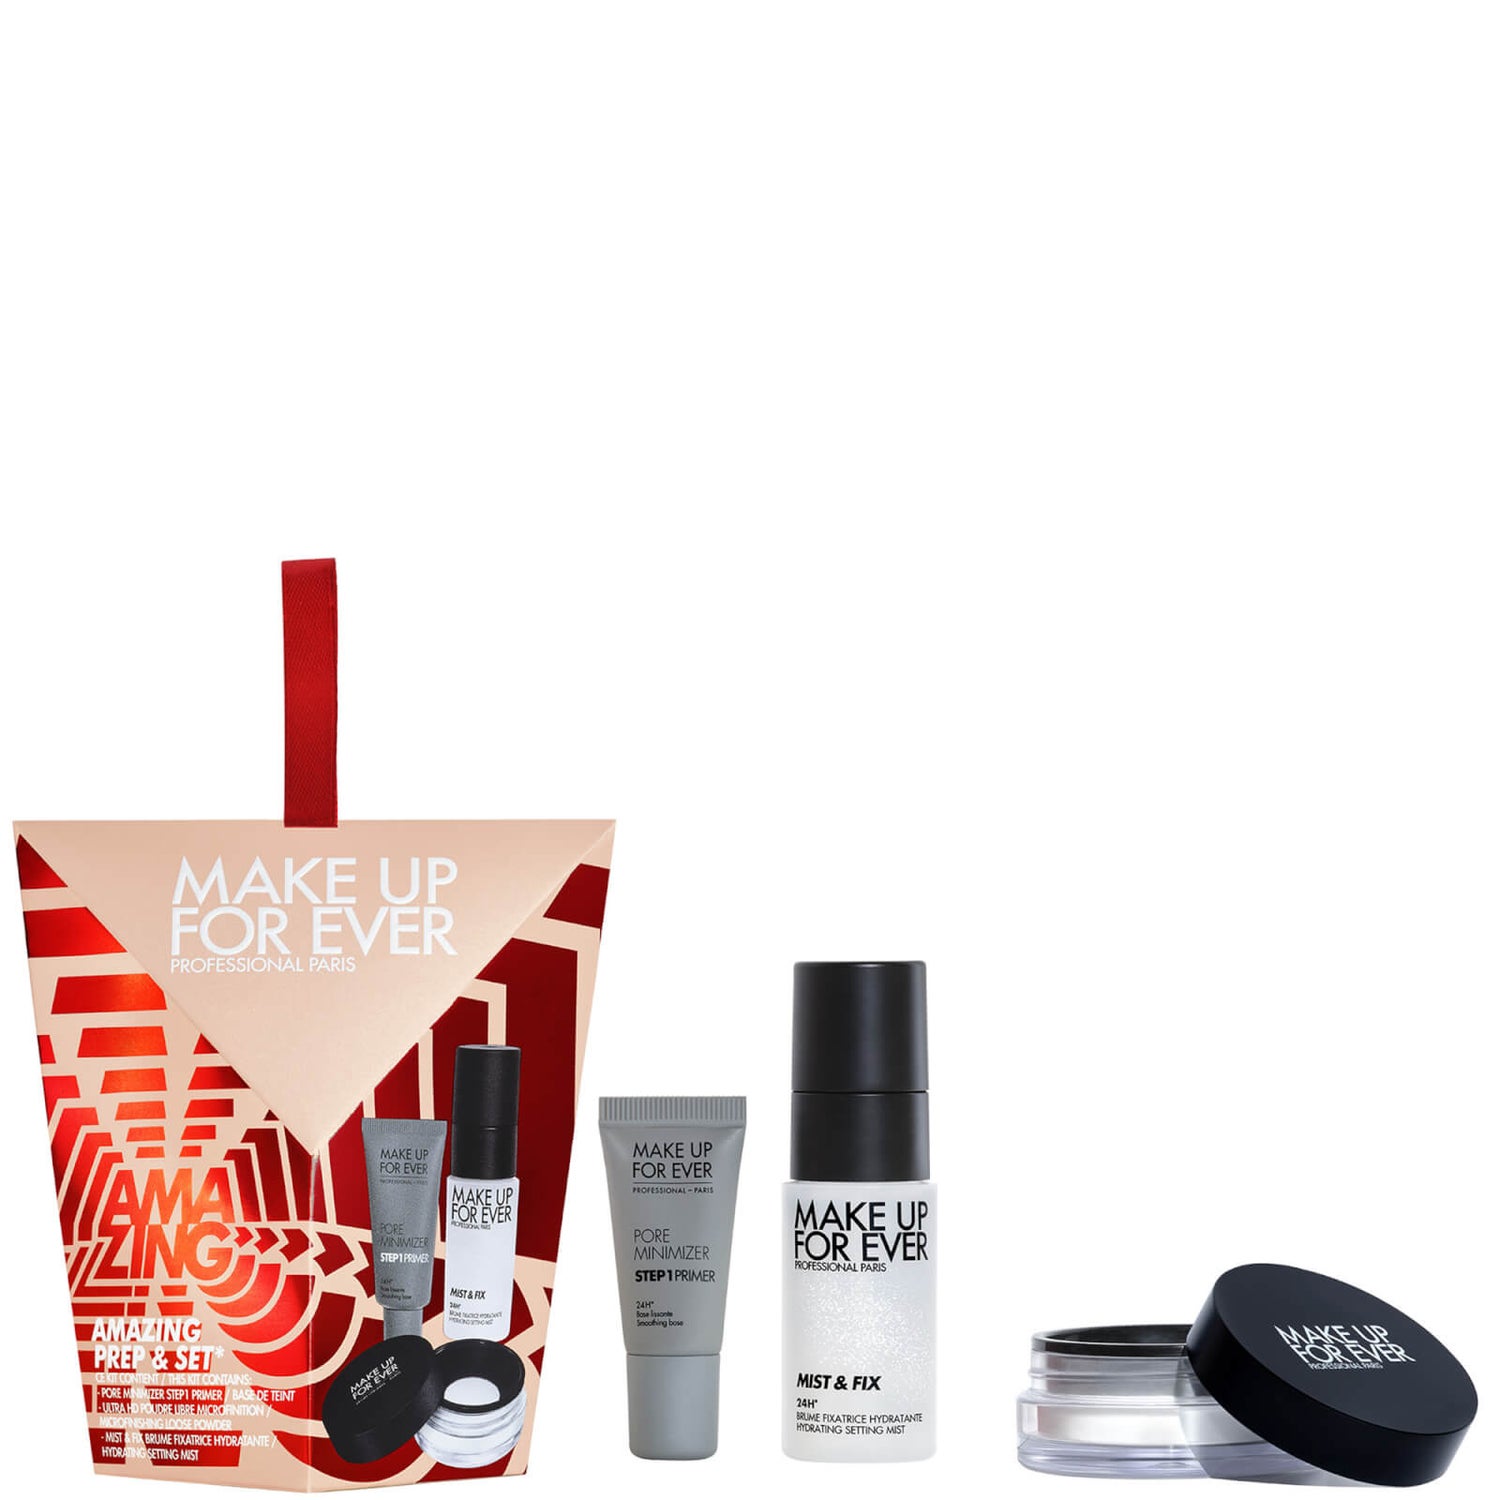 MAKE UP FOR EVER Amazing Prep and Set Holiday Set (Worth £36.00)